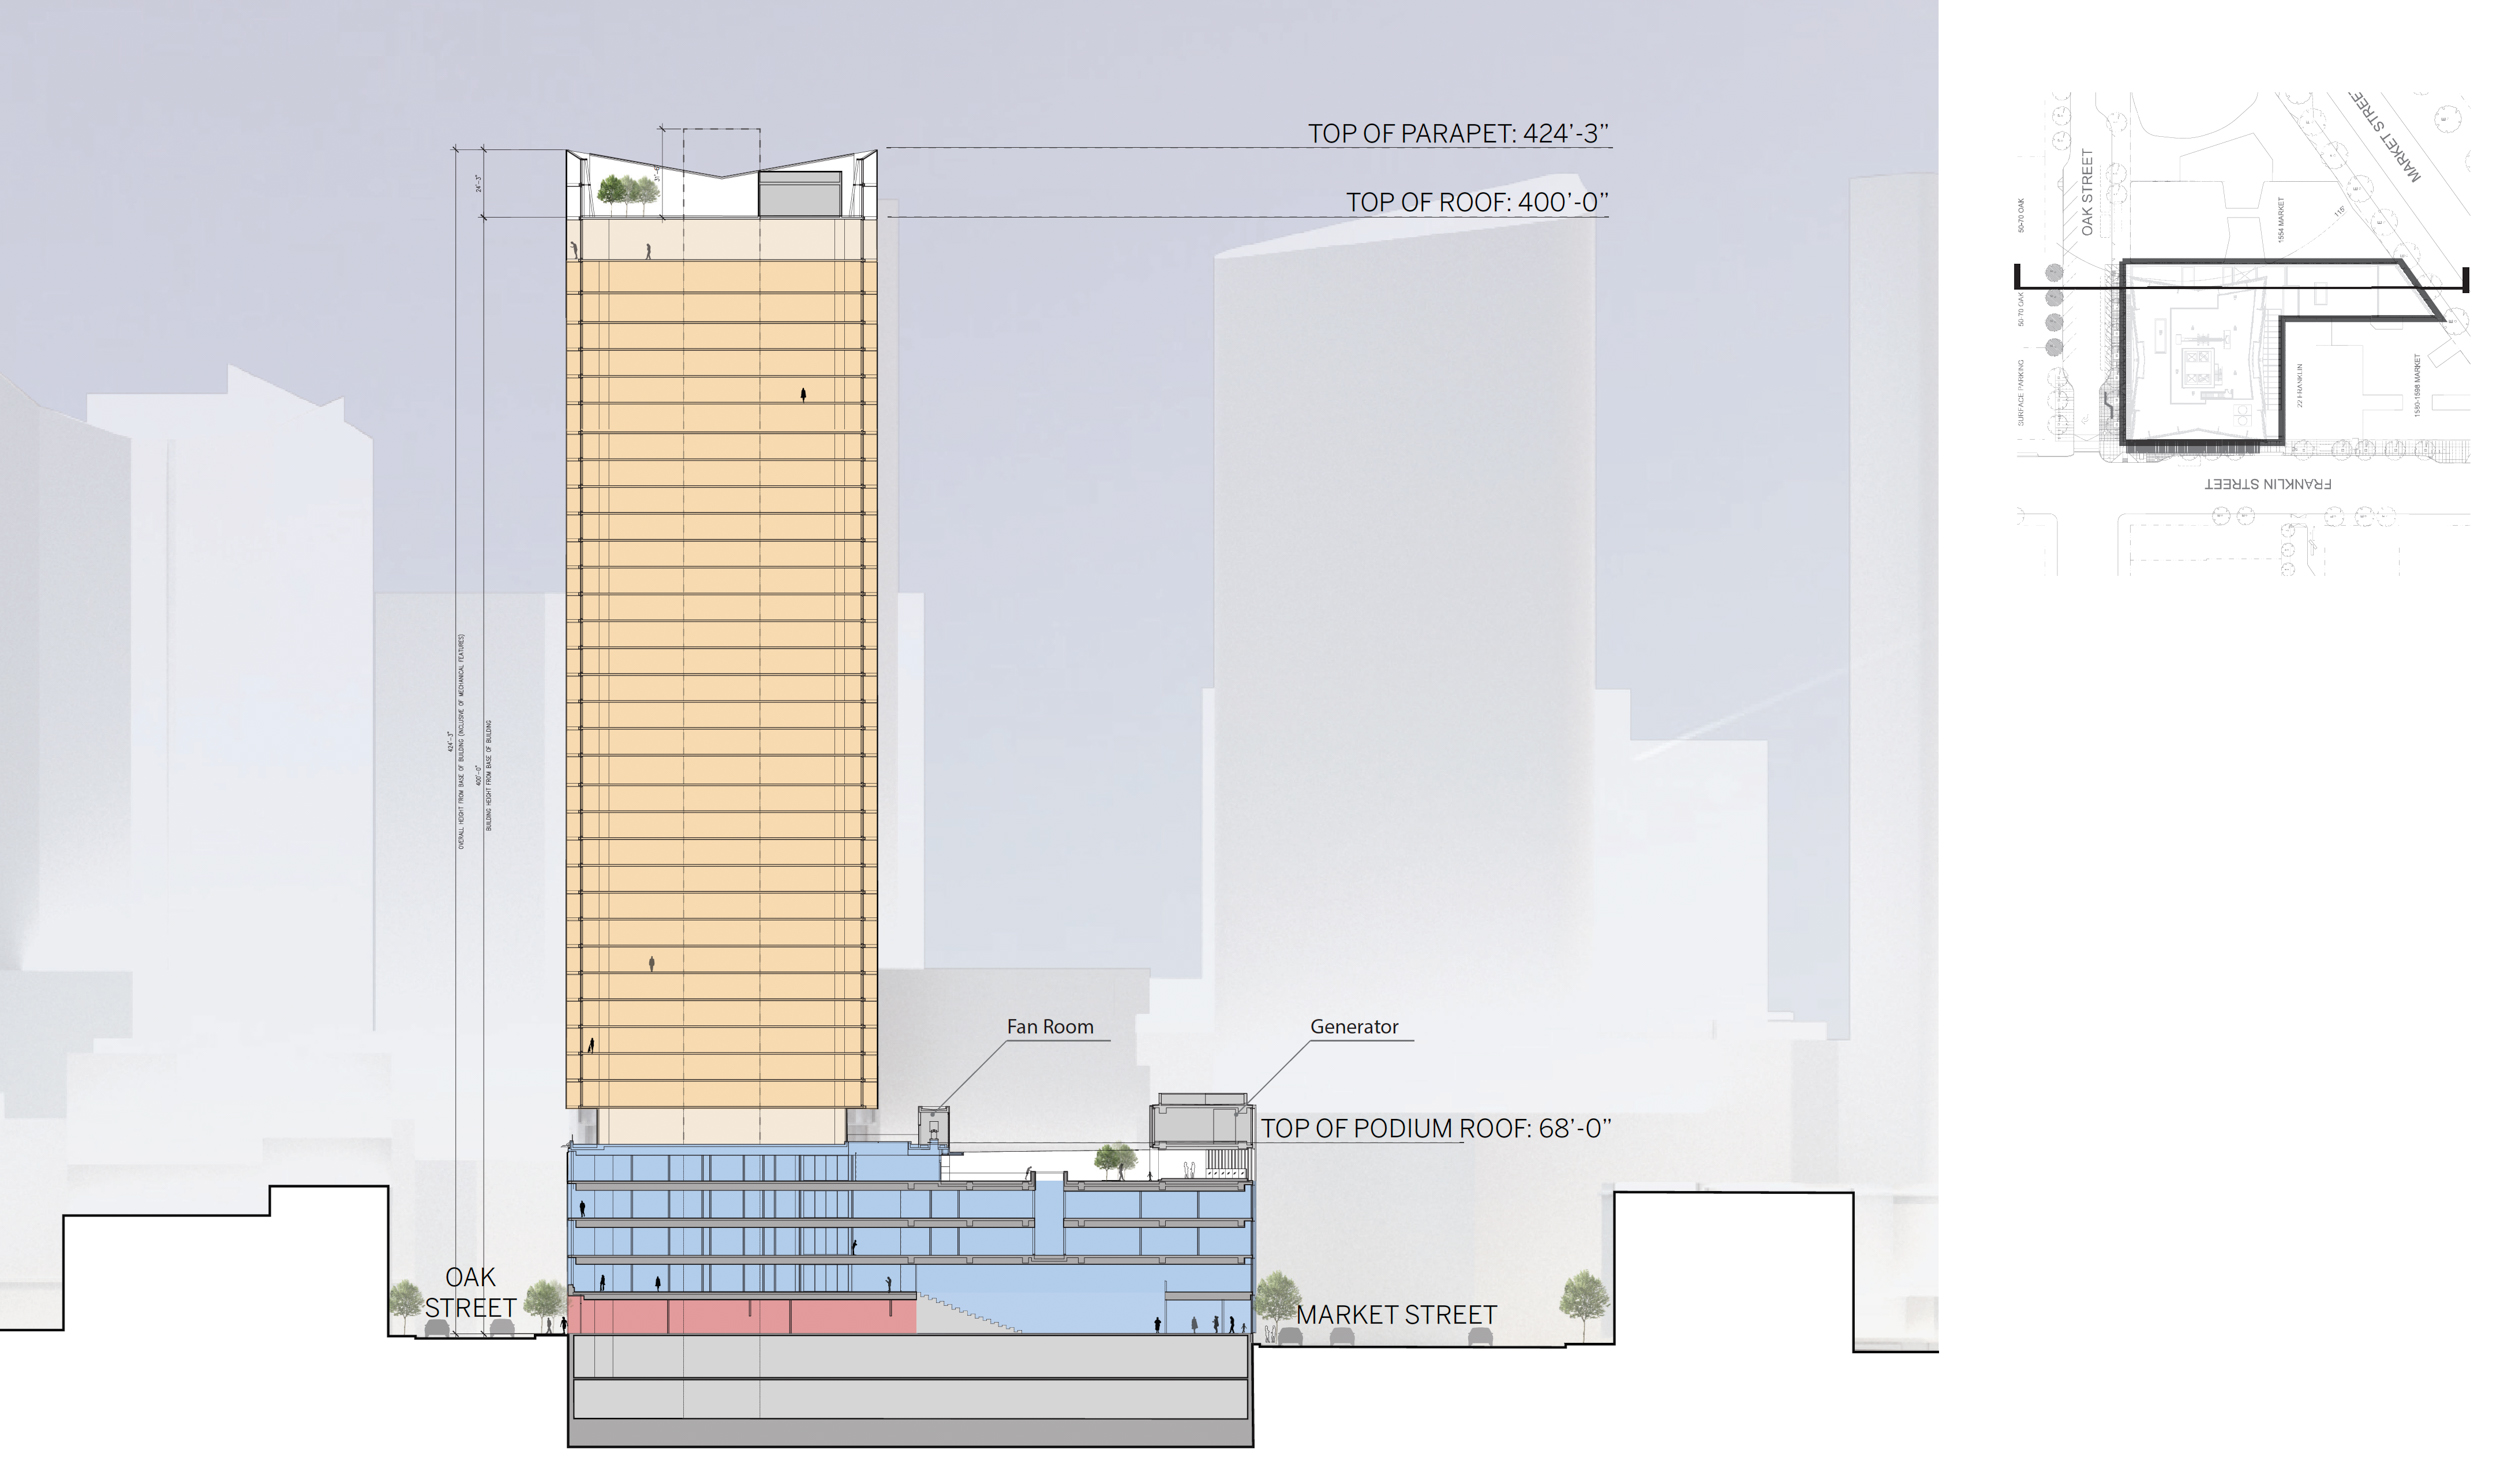 98 Franklin Street vertical cross-section, elevation by Skidmore Owings & Merrill